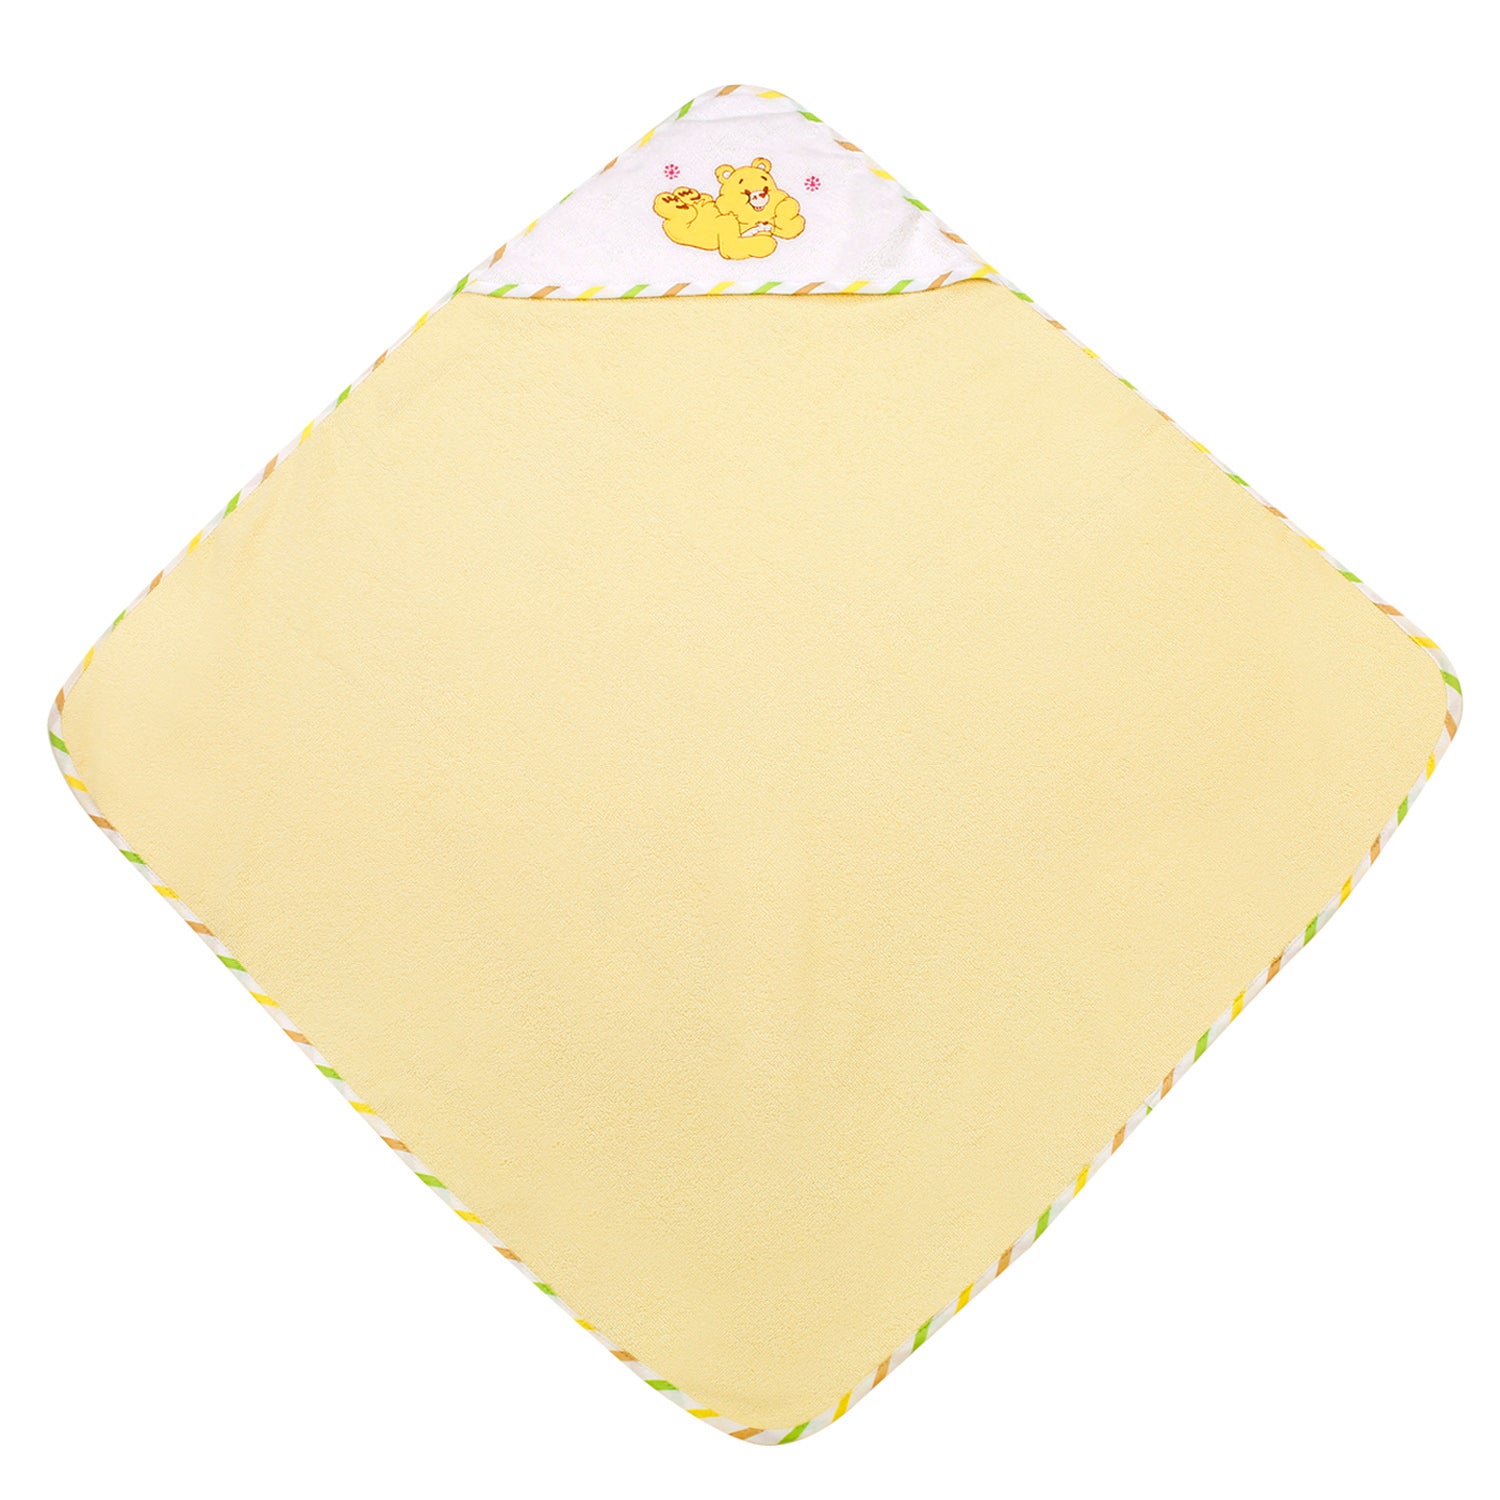 Baby Moo Lion Yellow And White Hooded Towel